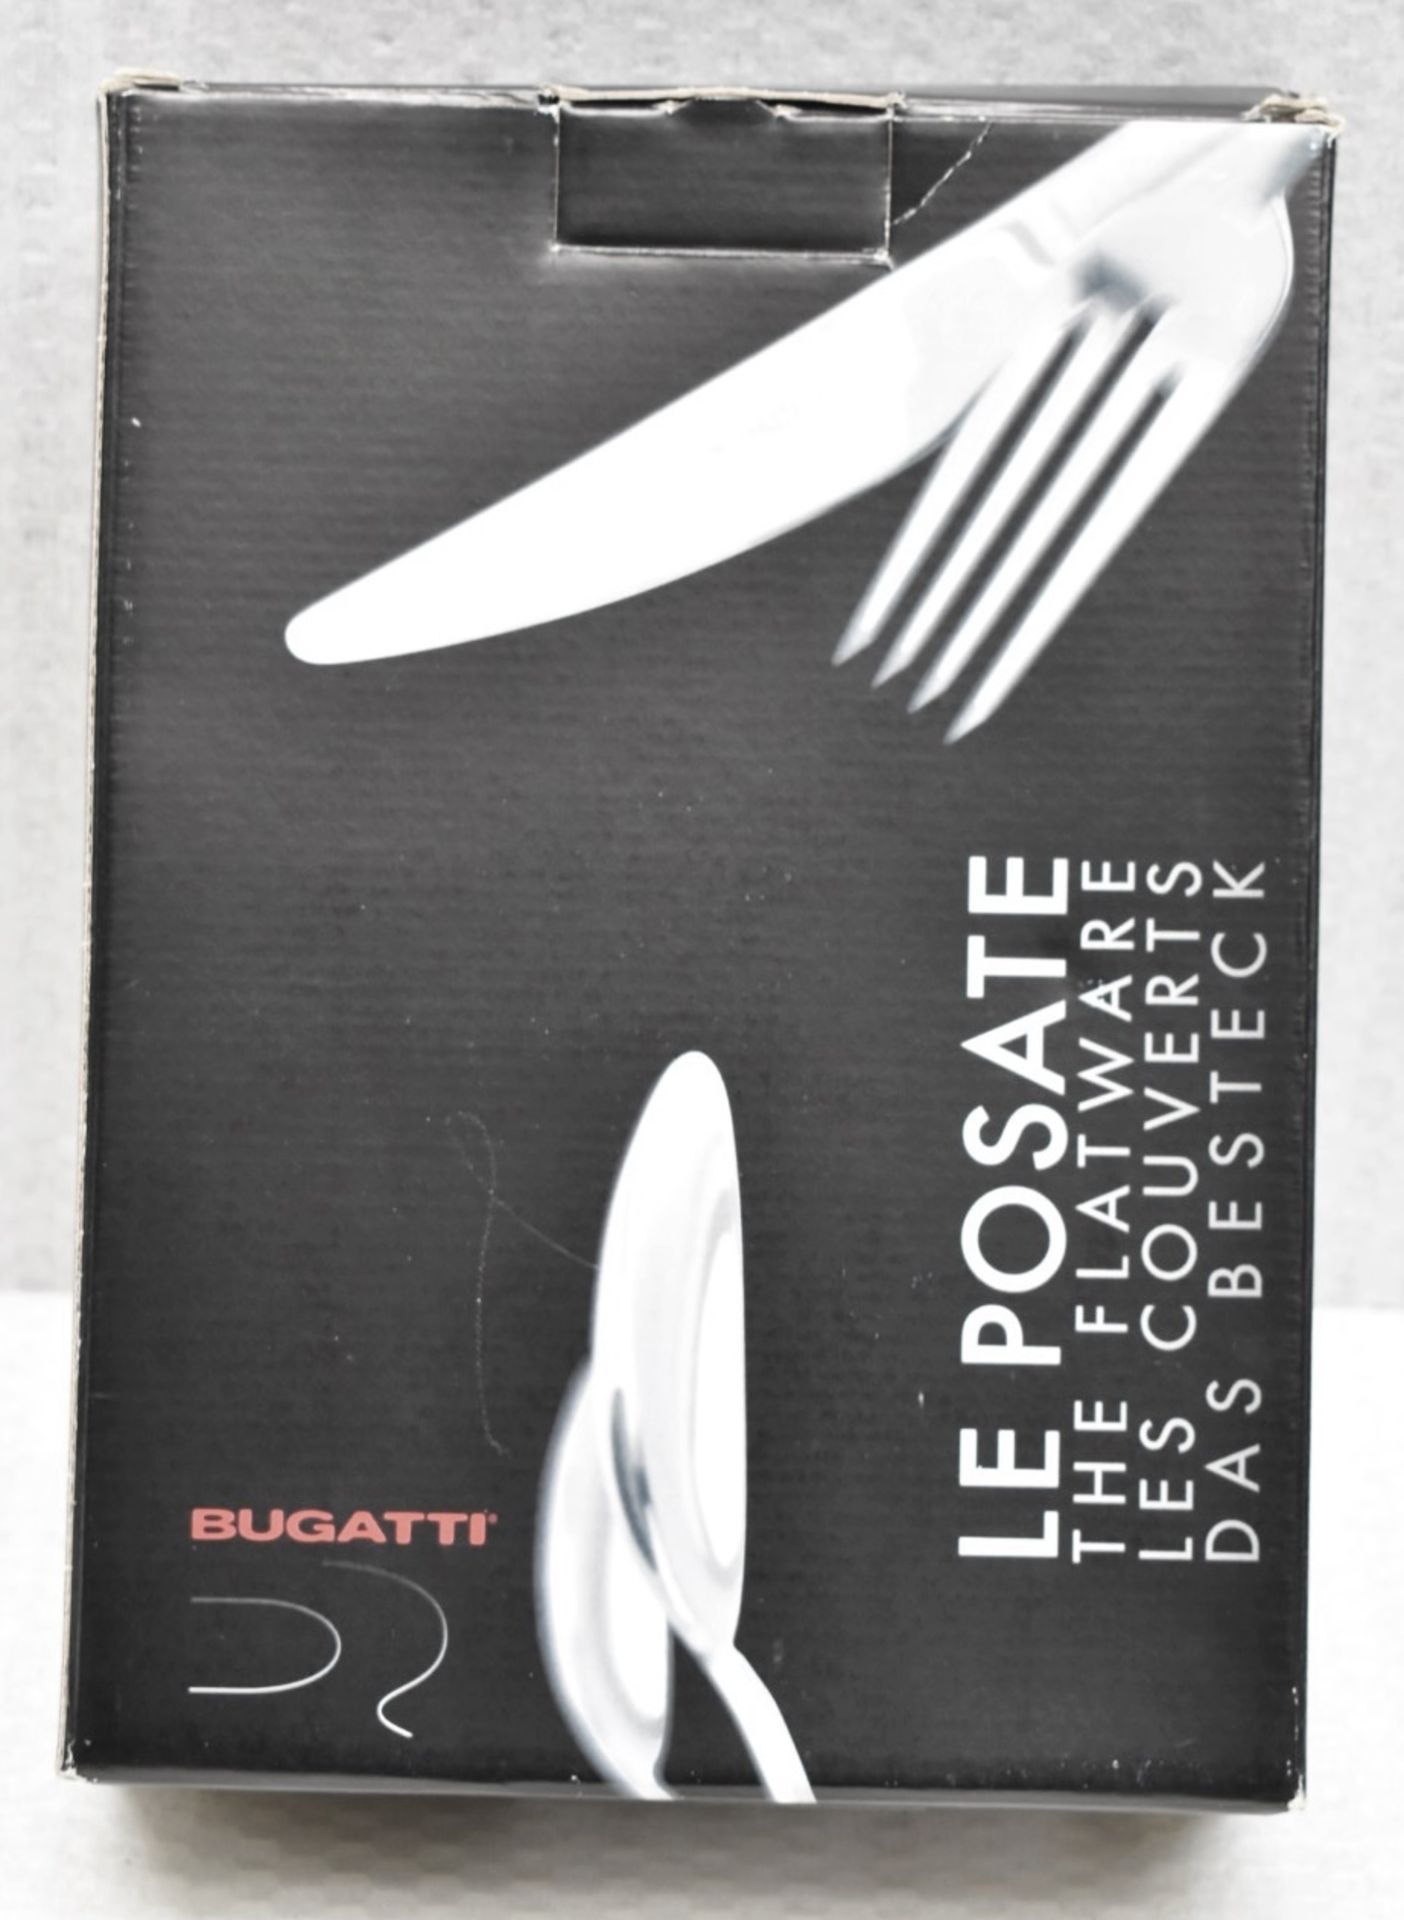 1 x BUGATTI 'Ares' Stainless Steel 24-Piece Cutlery Set - RRP £299.99 - Boxed Stock - Image 6 of 10